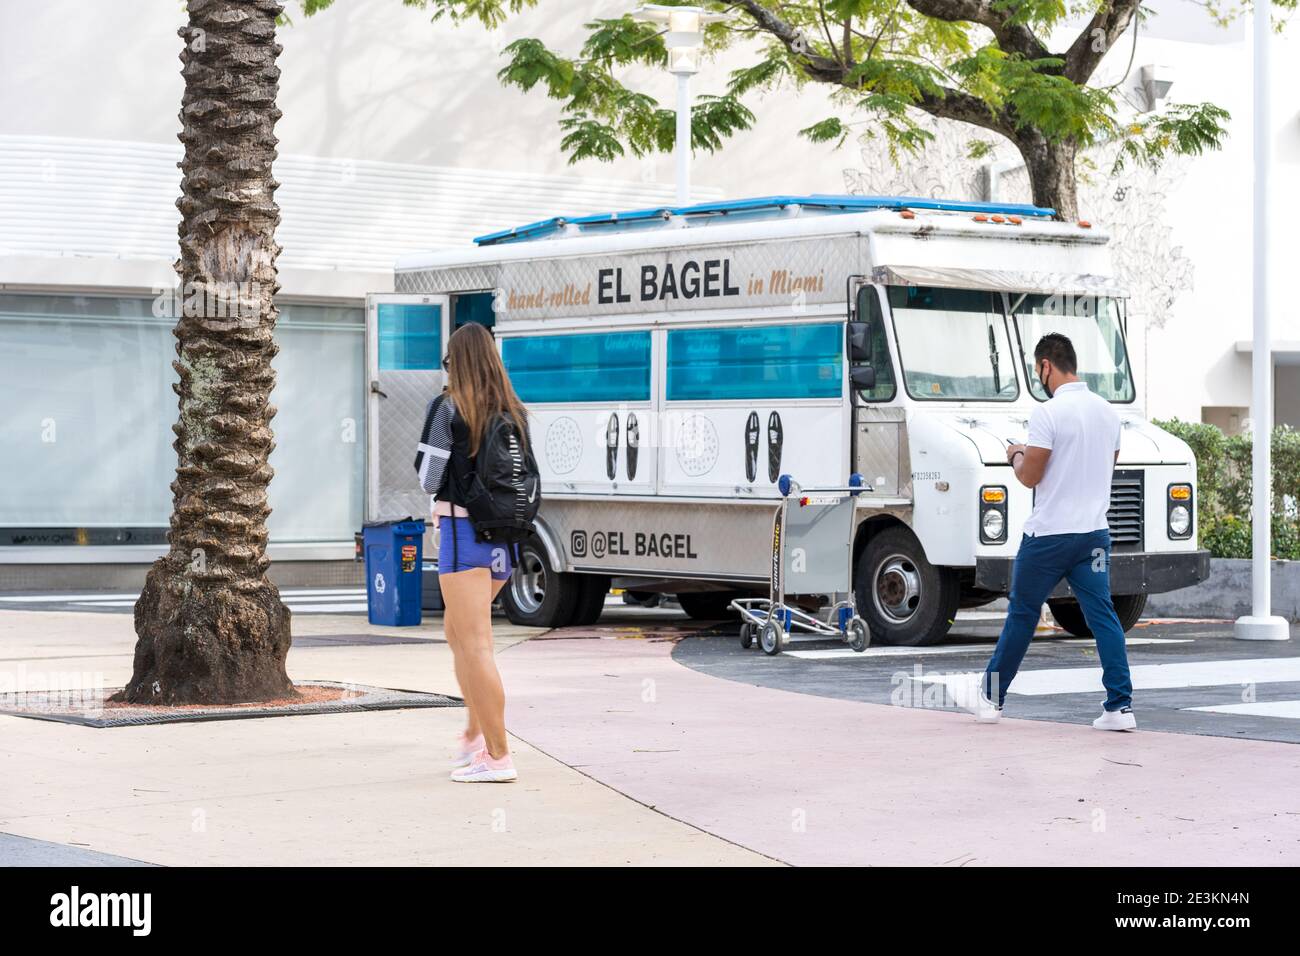 Miami, Florida - January 3, 2021: Food truck Parked in Lincoln Road Mall Miami. Stock Photo